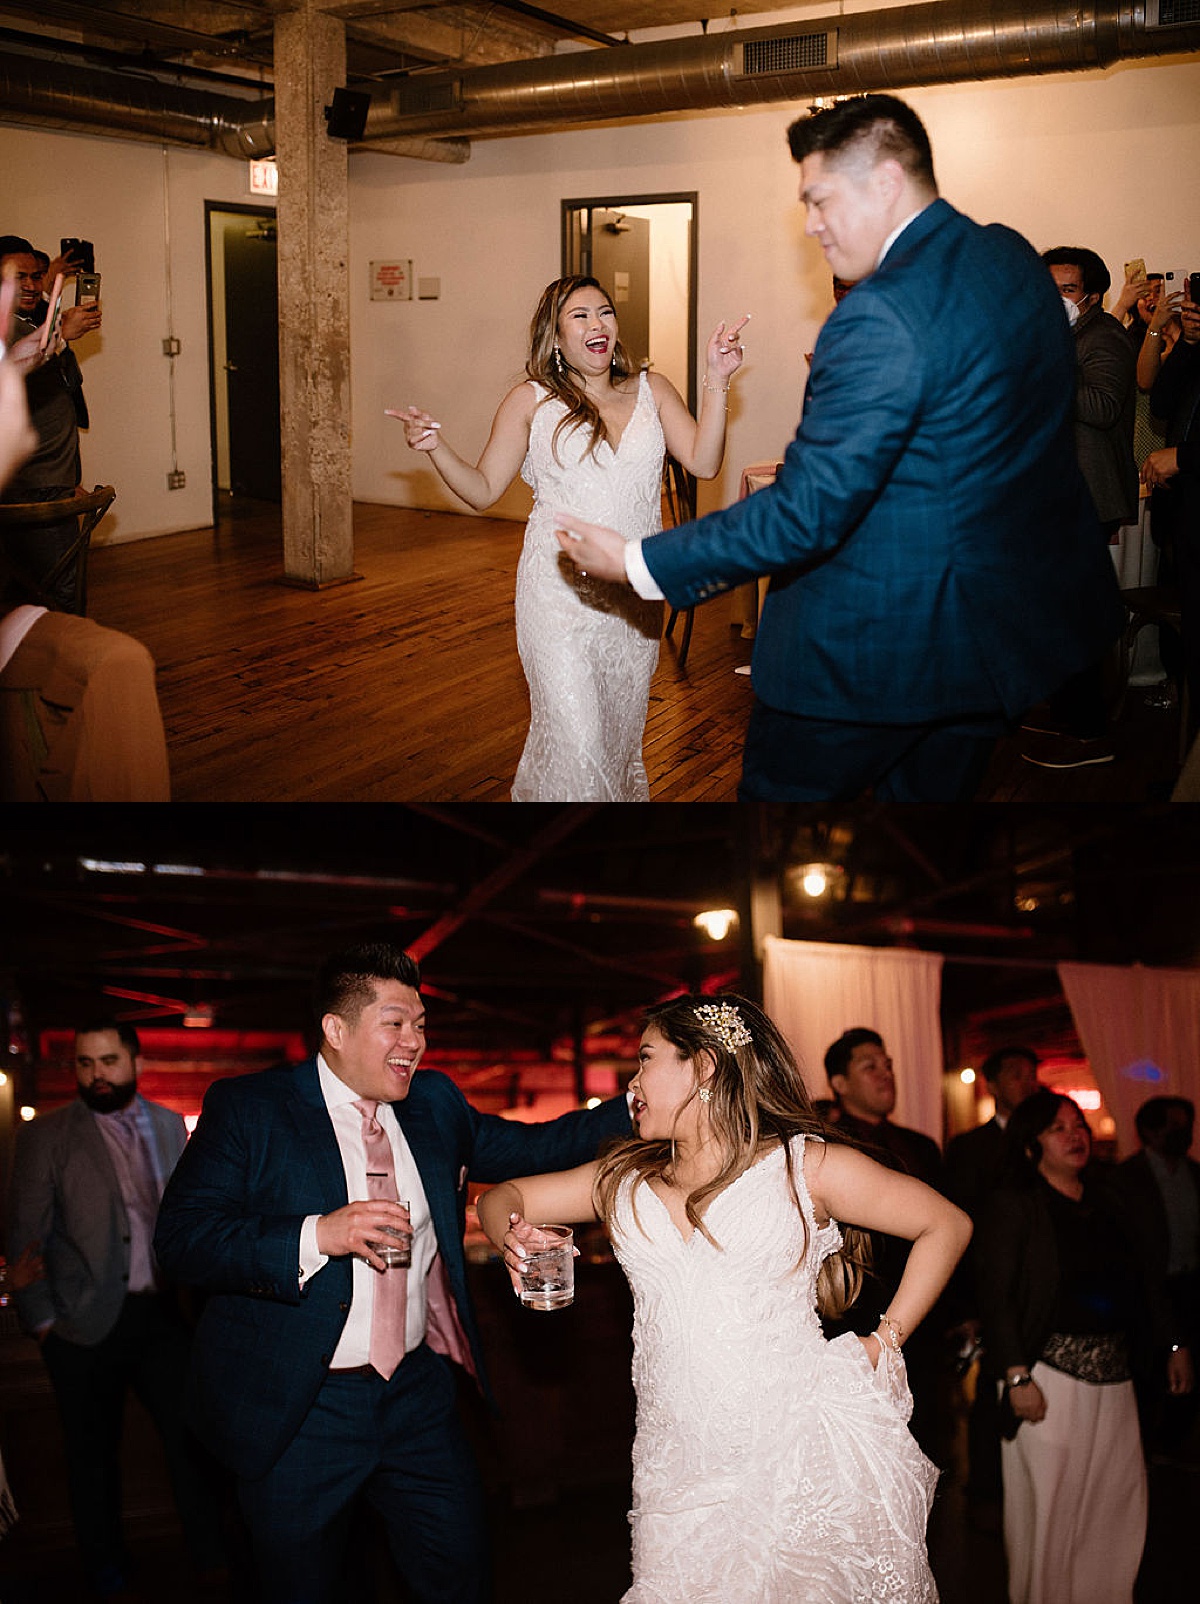 Bride and groom dance and celebrate at Chicago wedding venue reception shot by Indigo Lace Collective